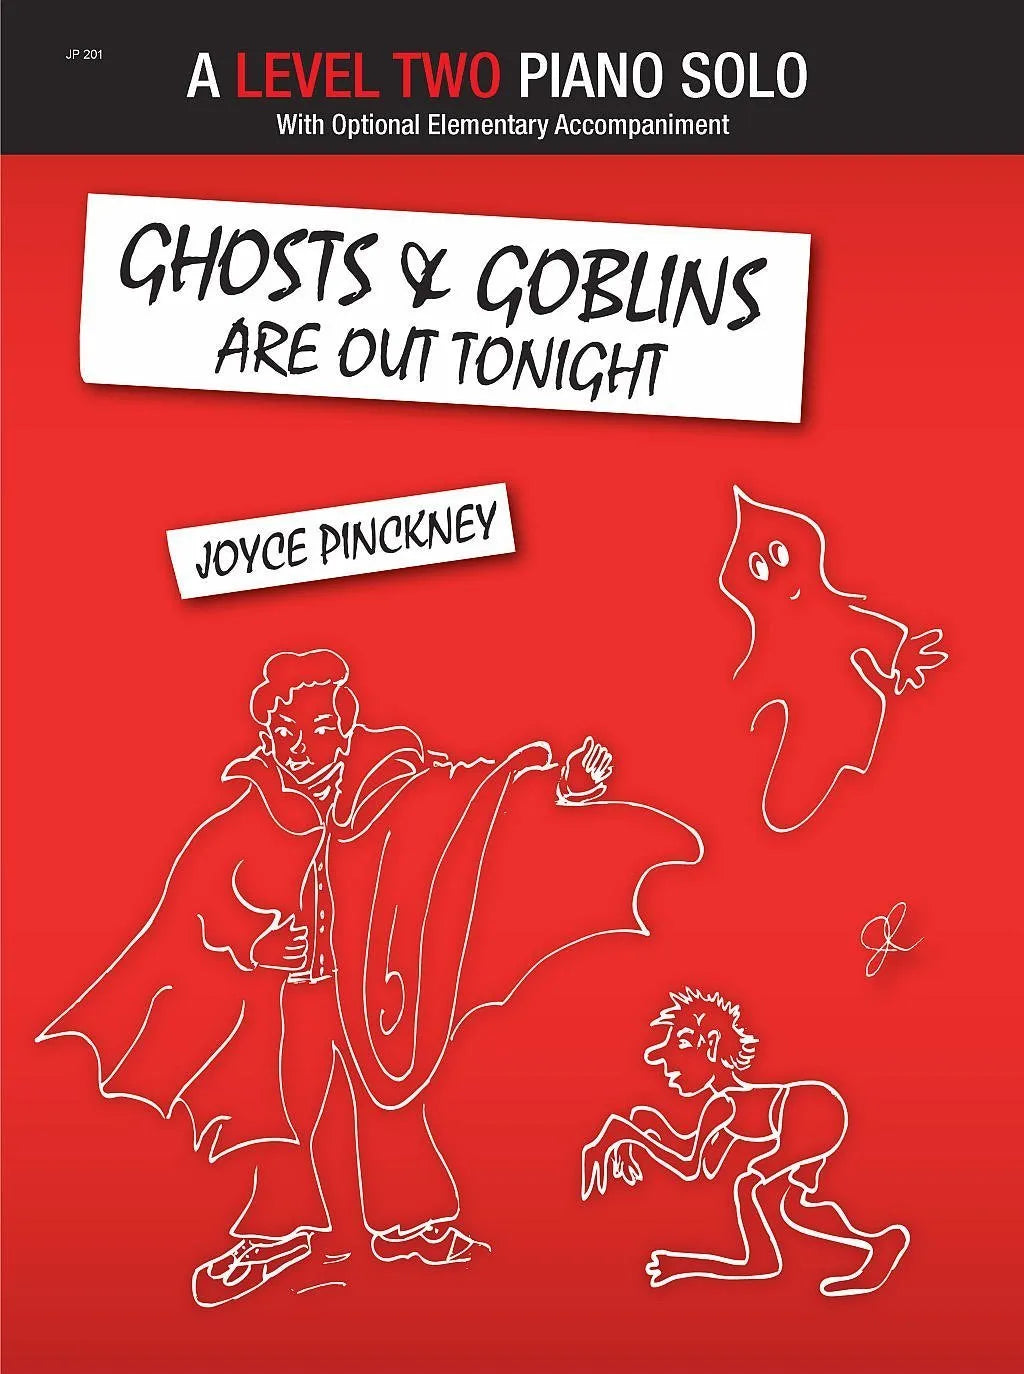 Ghosts & Goblins Are Out Tonight